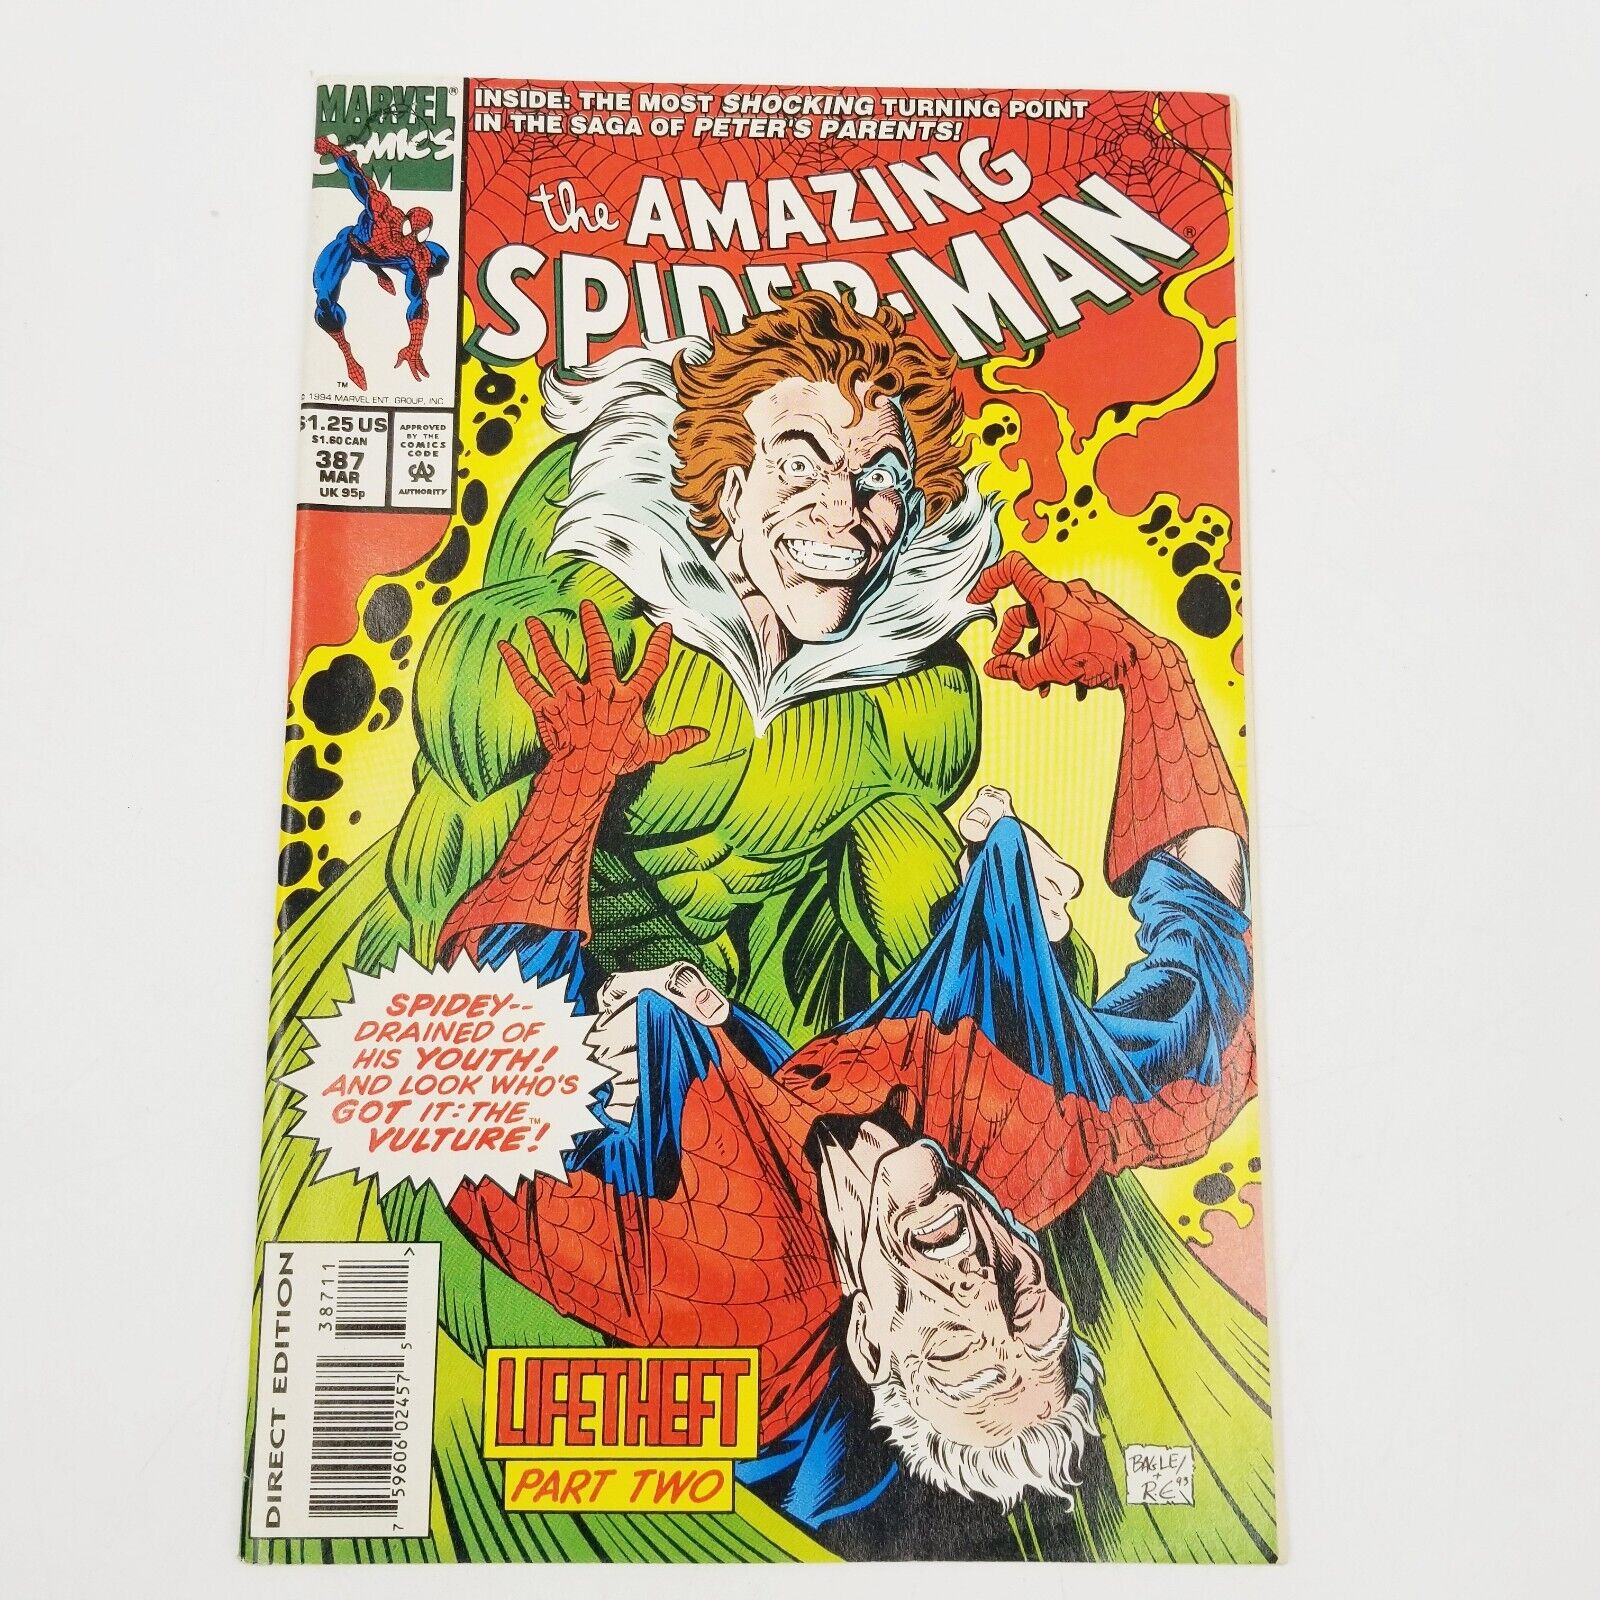 AMAZING SPIDER-MAN #387 MARCH 1994 VULTURE LIFETHEFT PART 2 TWO